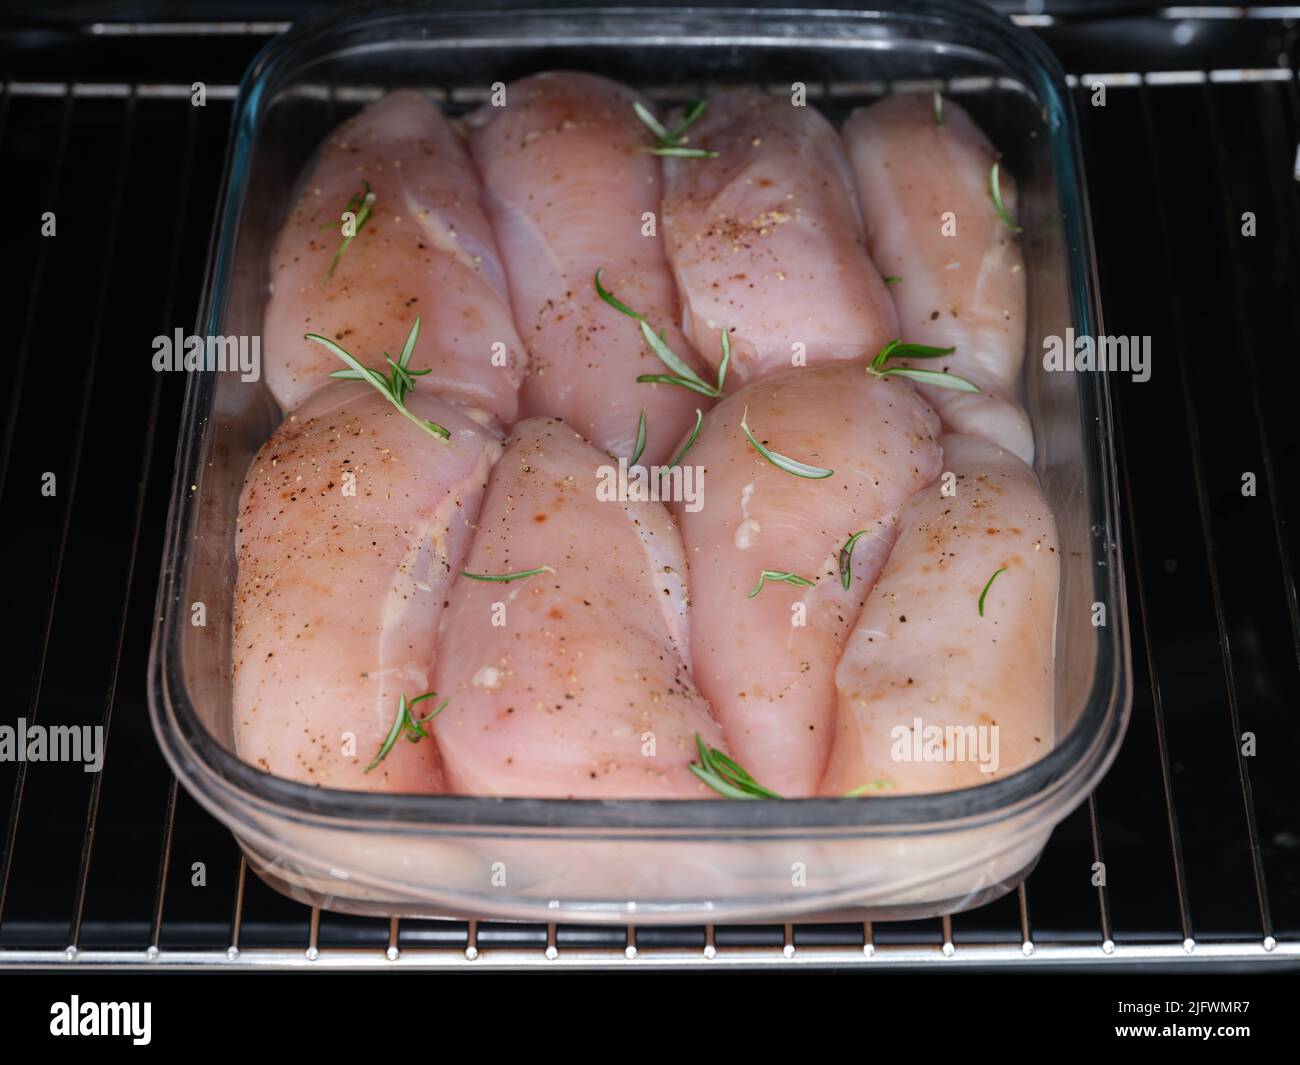 A glass baking tray with raw chicken breasts with rosemary leaves on them in it in an oven. Close up. Stock Photo